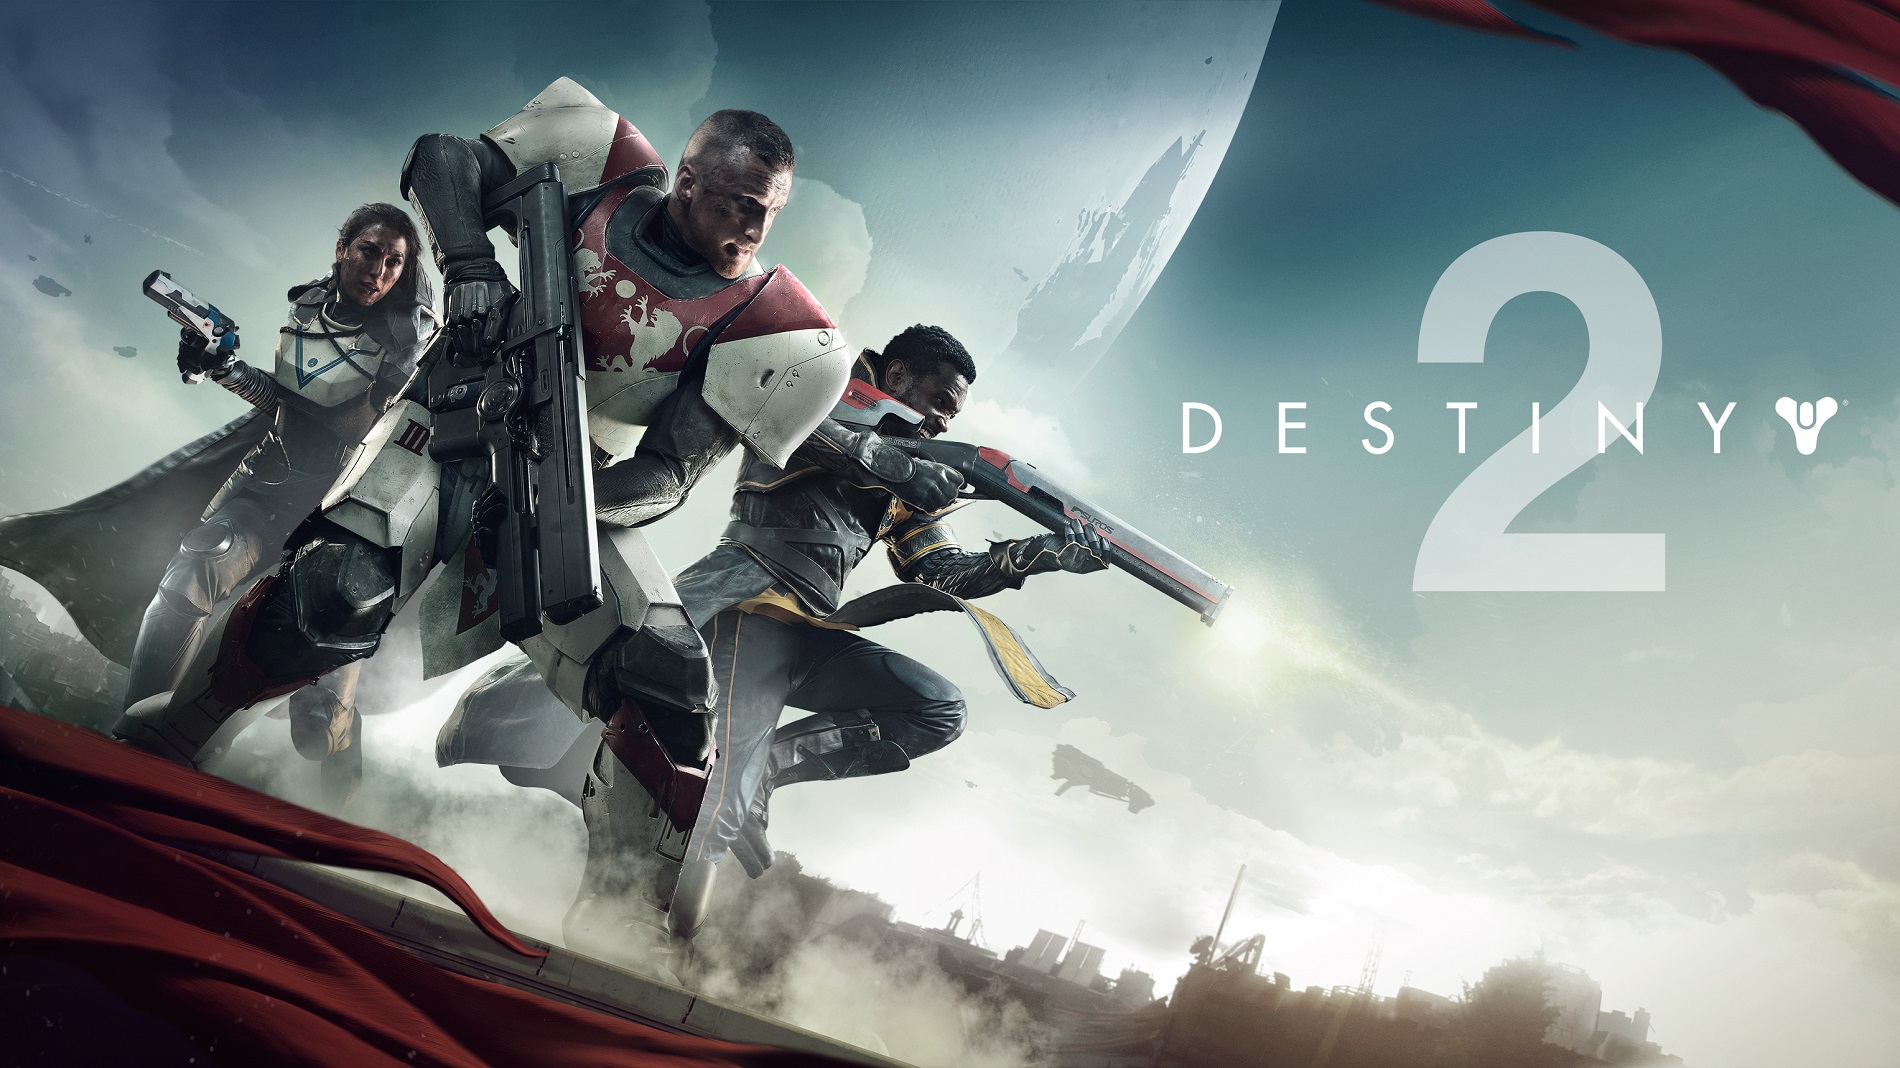 Cover art for "Destiny 2." Three armored soldiers with guns brace for battle.